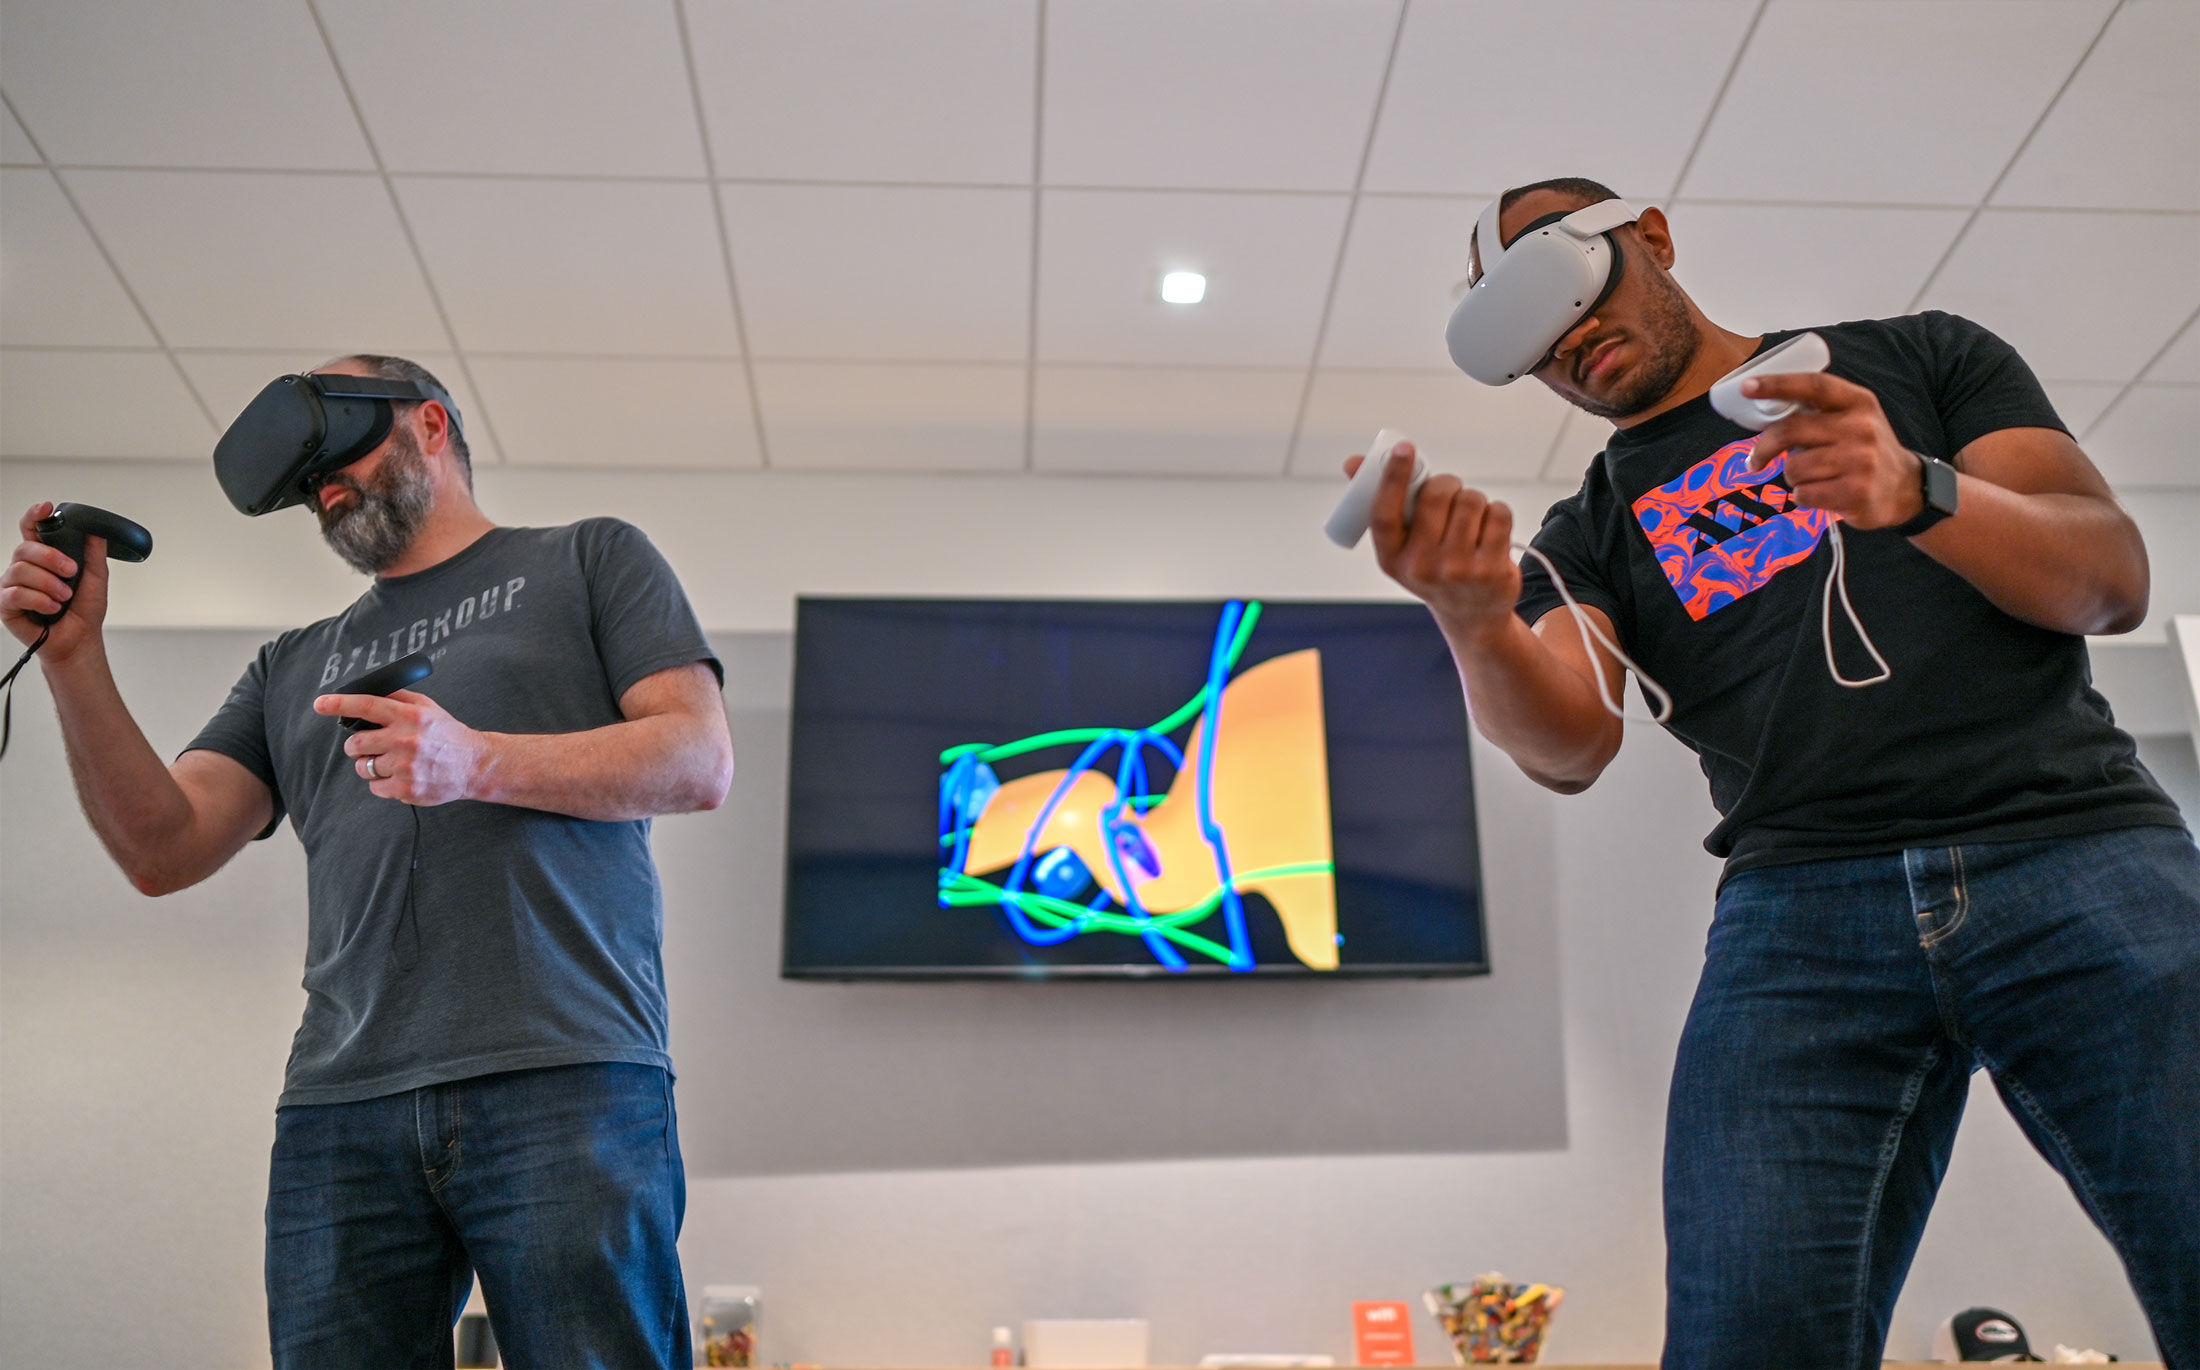 Two men interacting inside a virtual reality environment